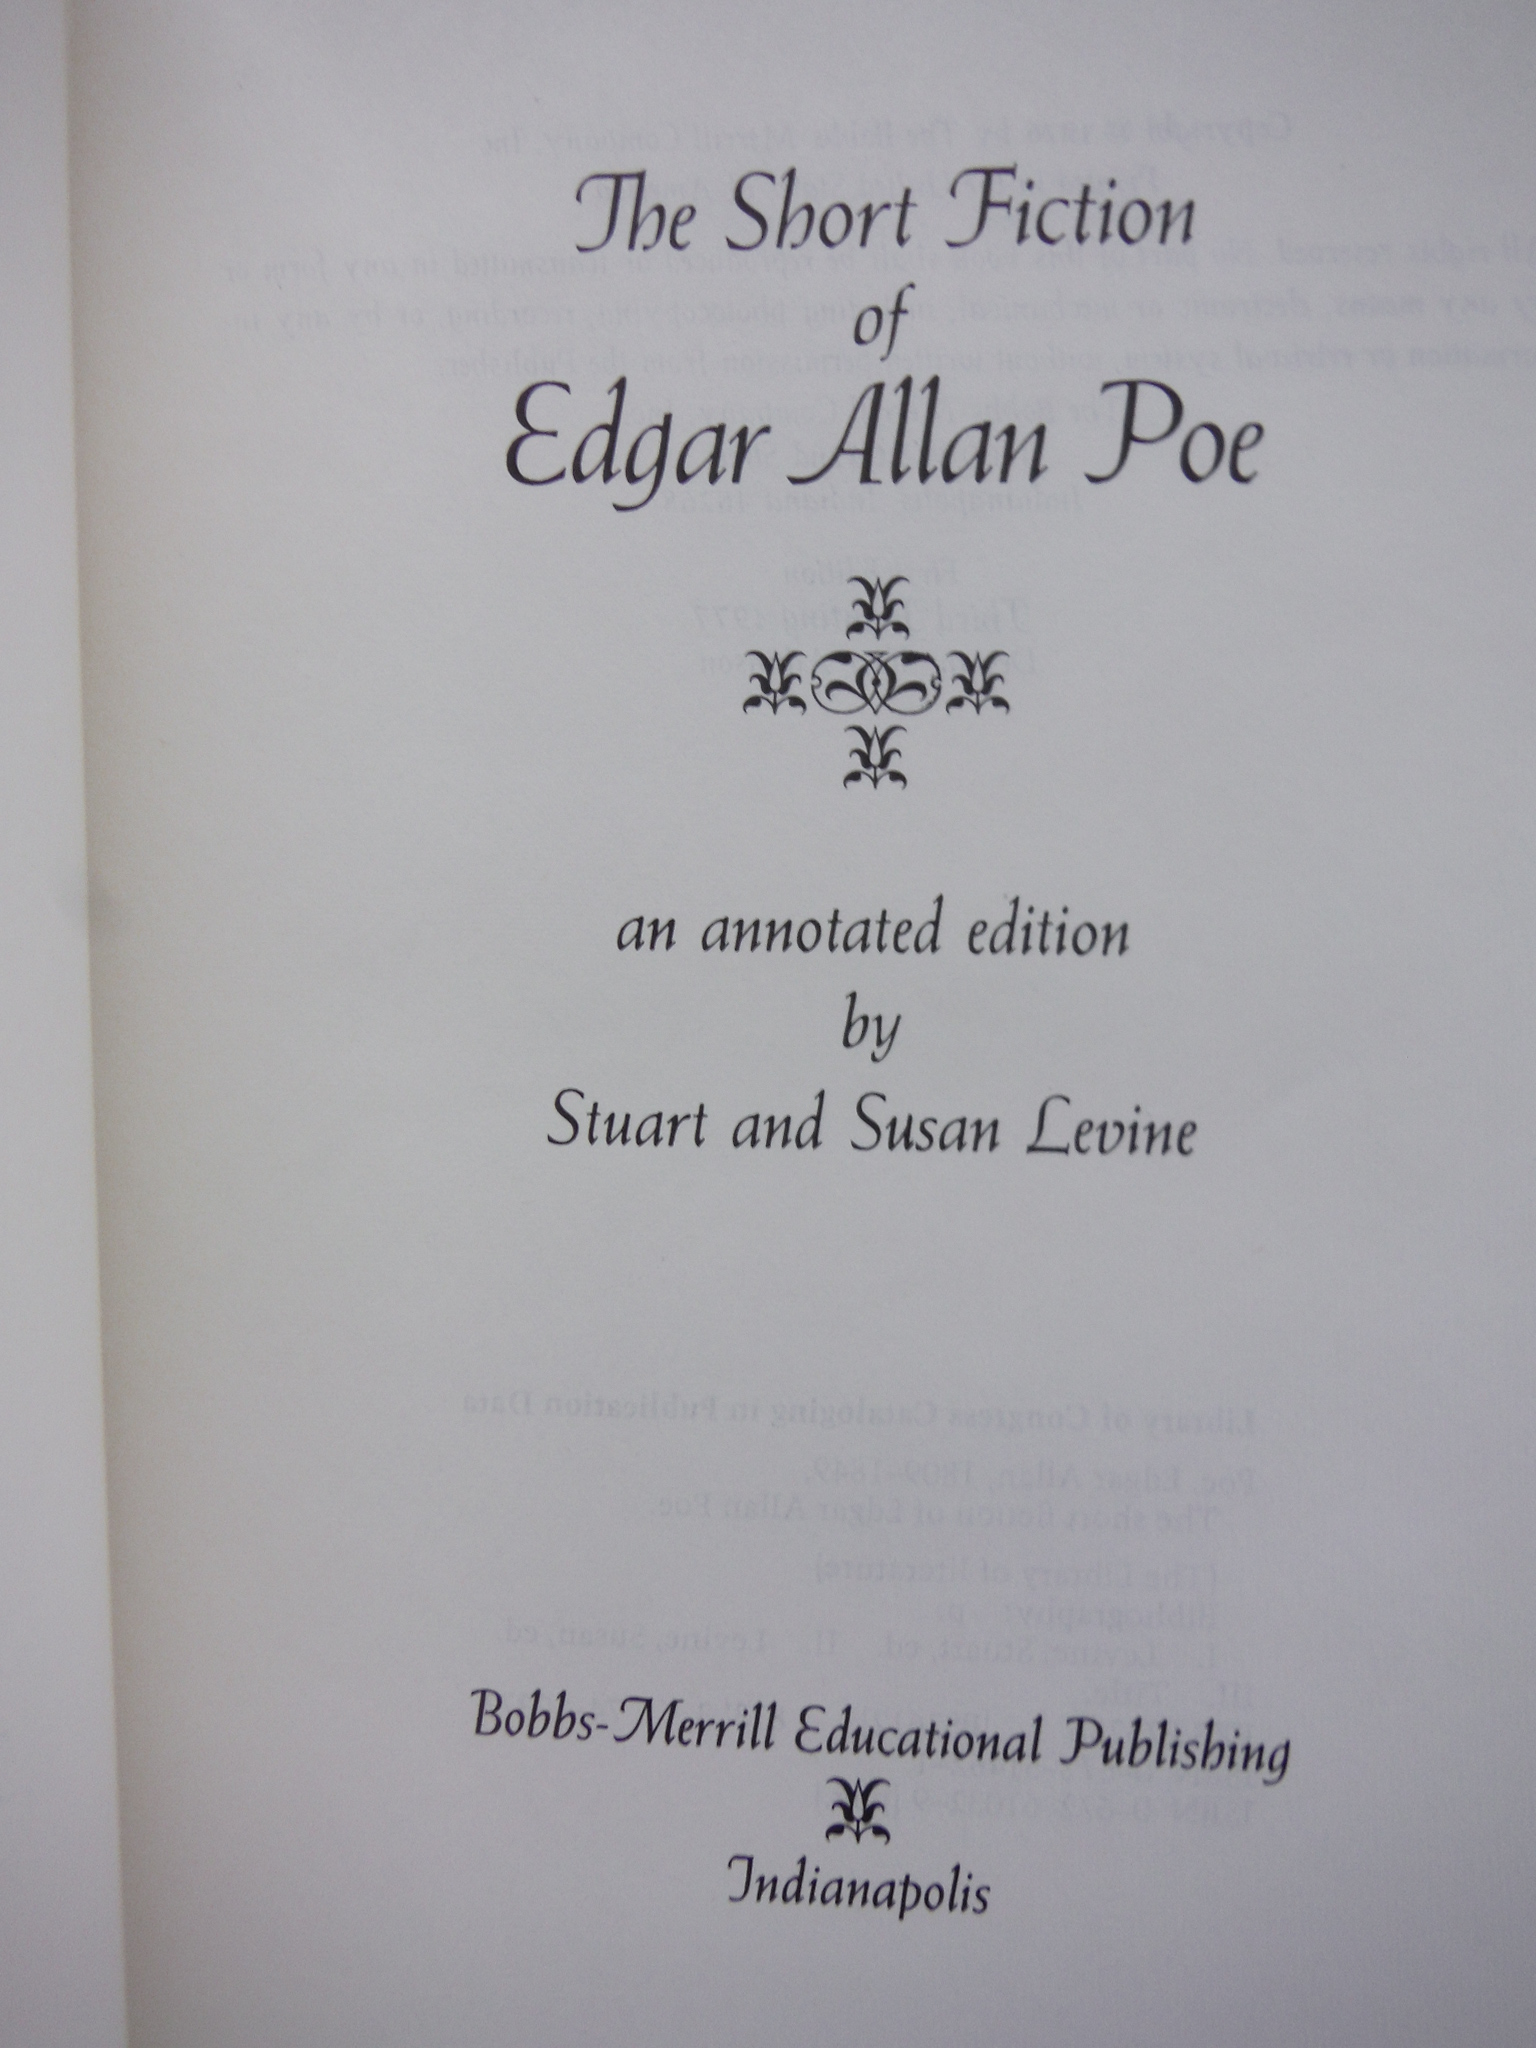 Image 1 of The short fiction of Edgar Allan Poe (The Library of literature, LL-40)